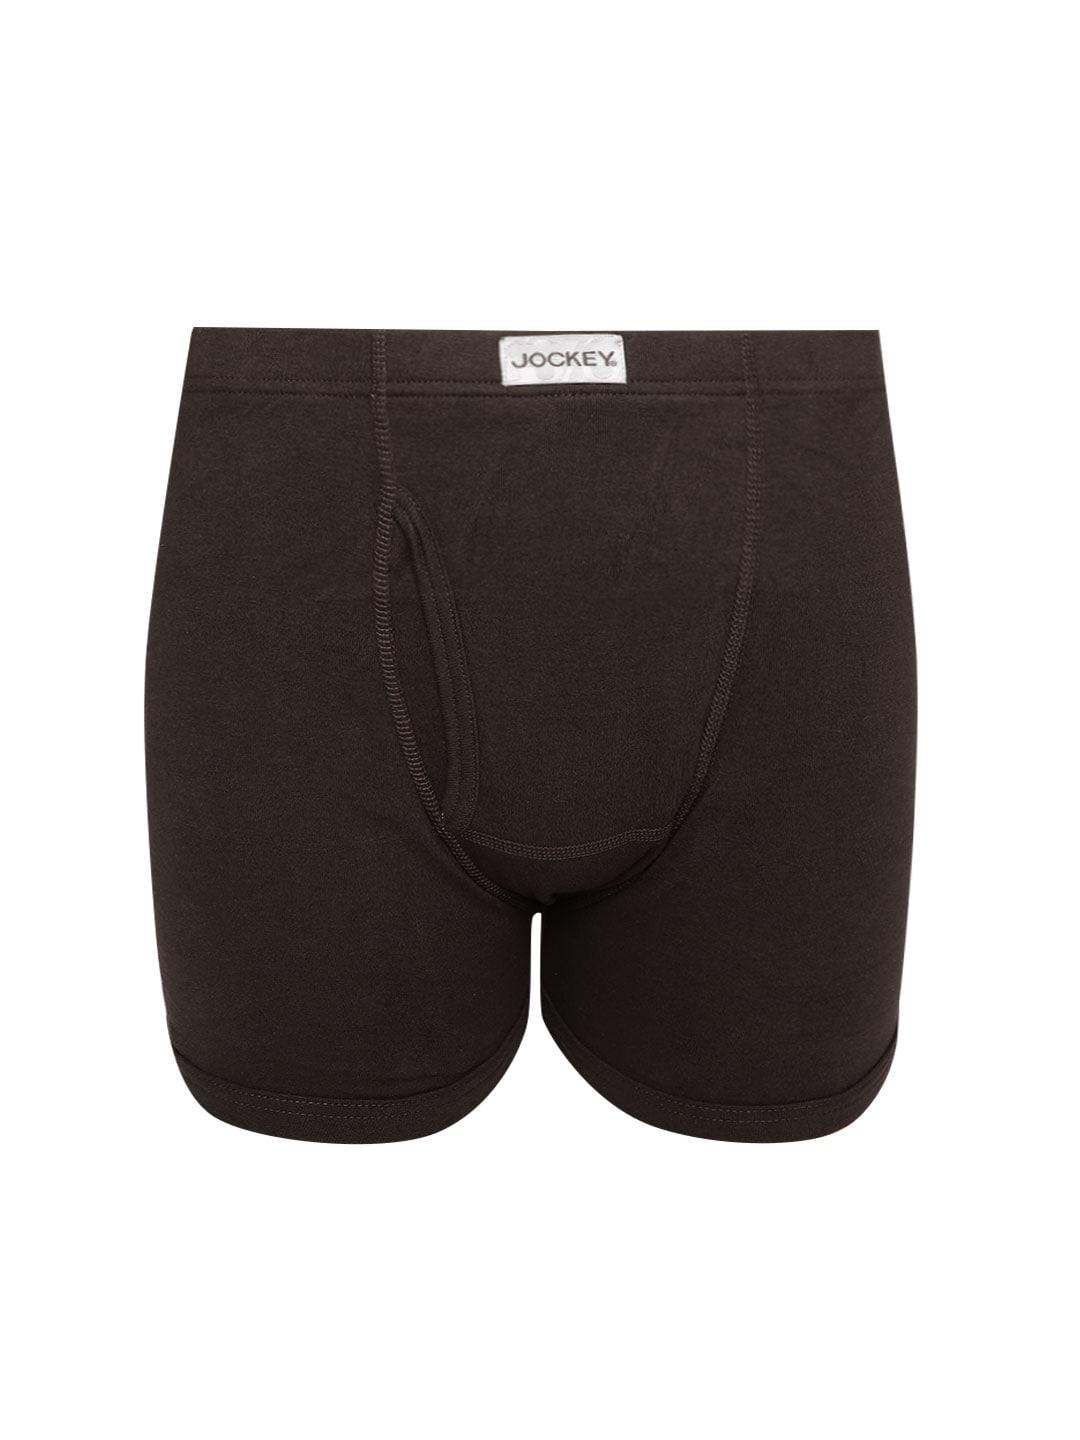 jockey brown super combed cotton trunks 8008-0105